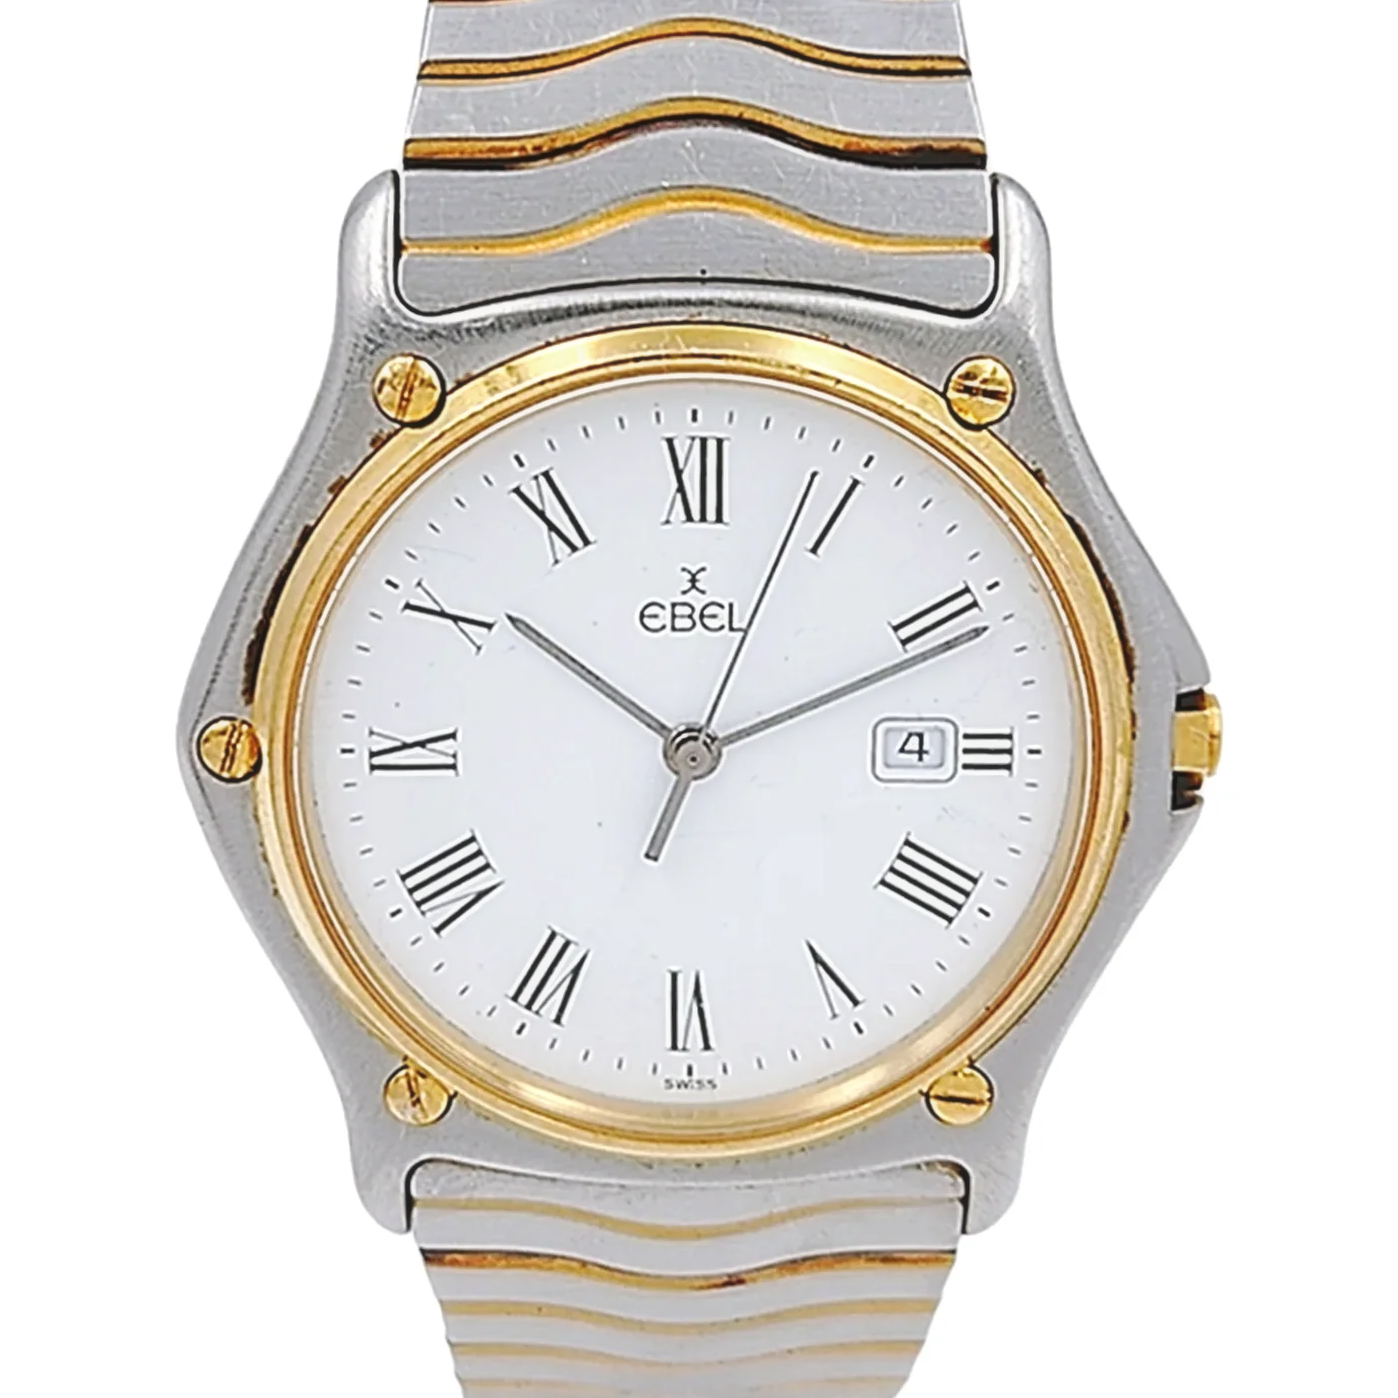 Men's Ebel 34mm 18K Yellow Gold / Stainless Steel Two Tone Band Watch with Date and White Roman Numeral Dial. (Pre-Owned)